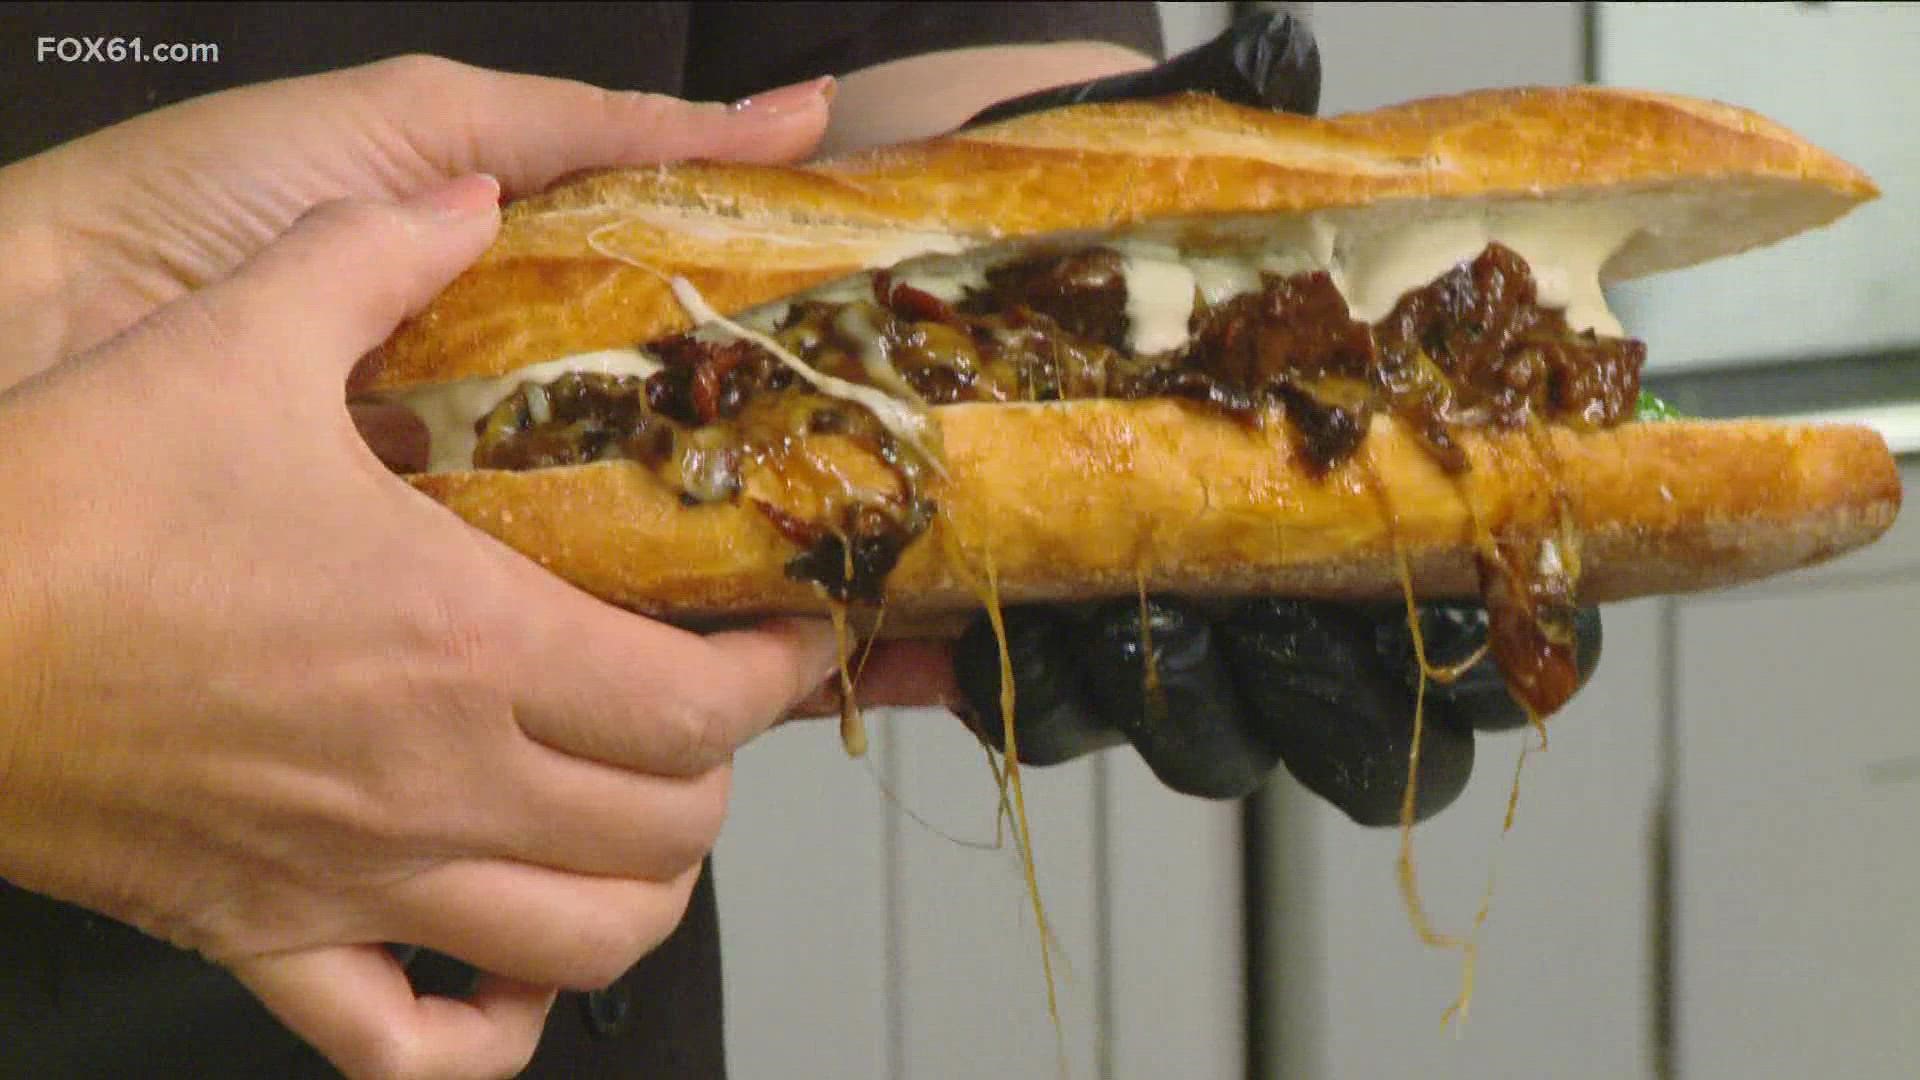 Chef Chris Sassi from Concentric Brewing Company whips up this delicious sandwich